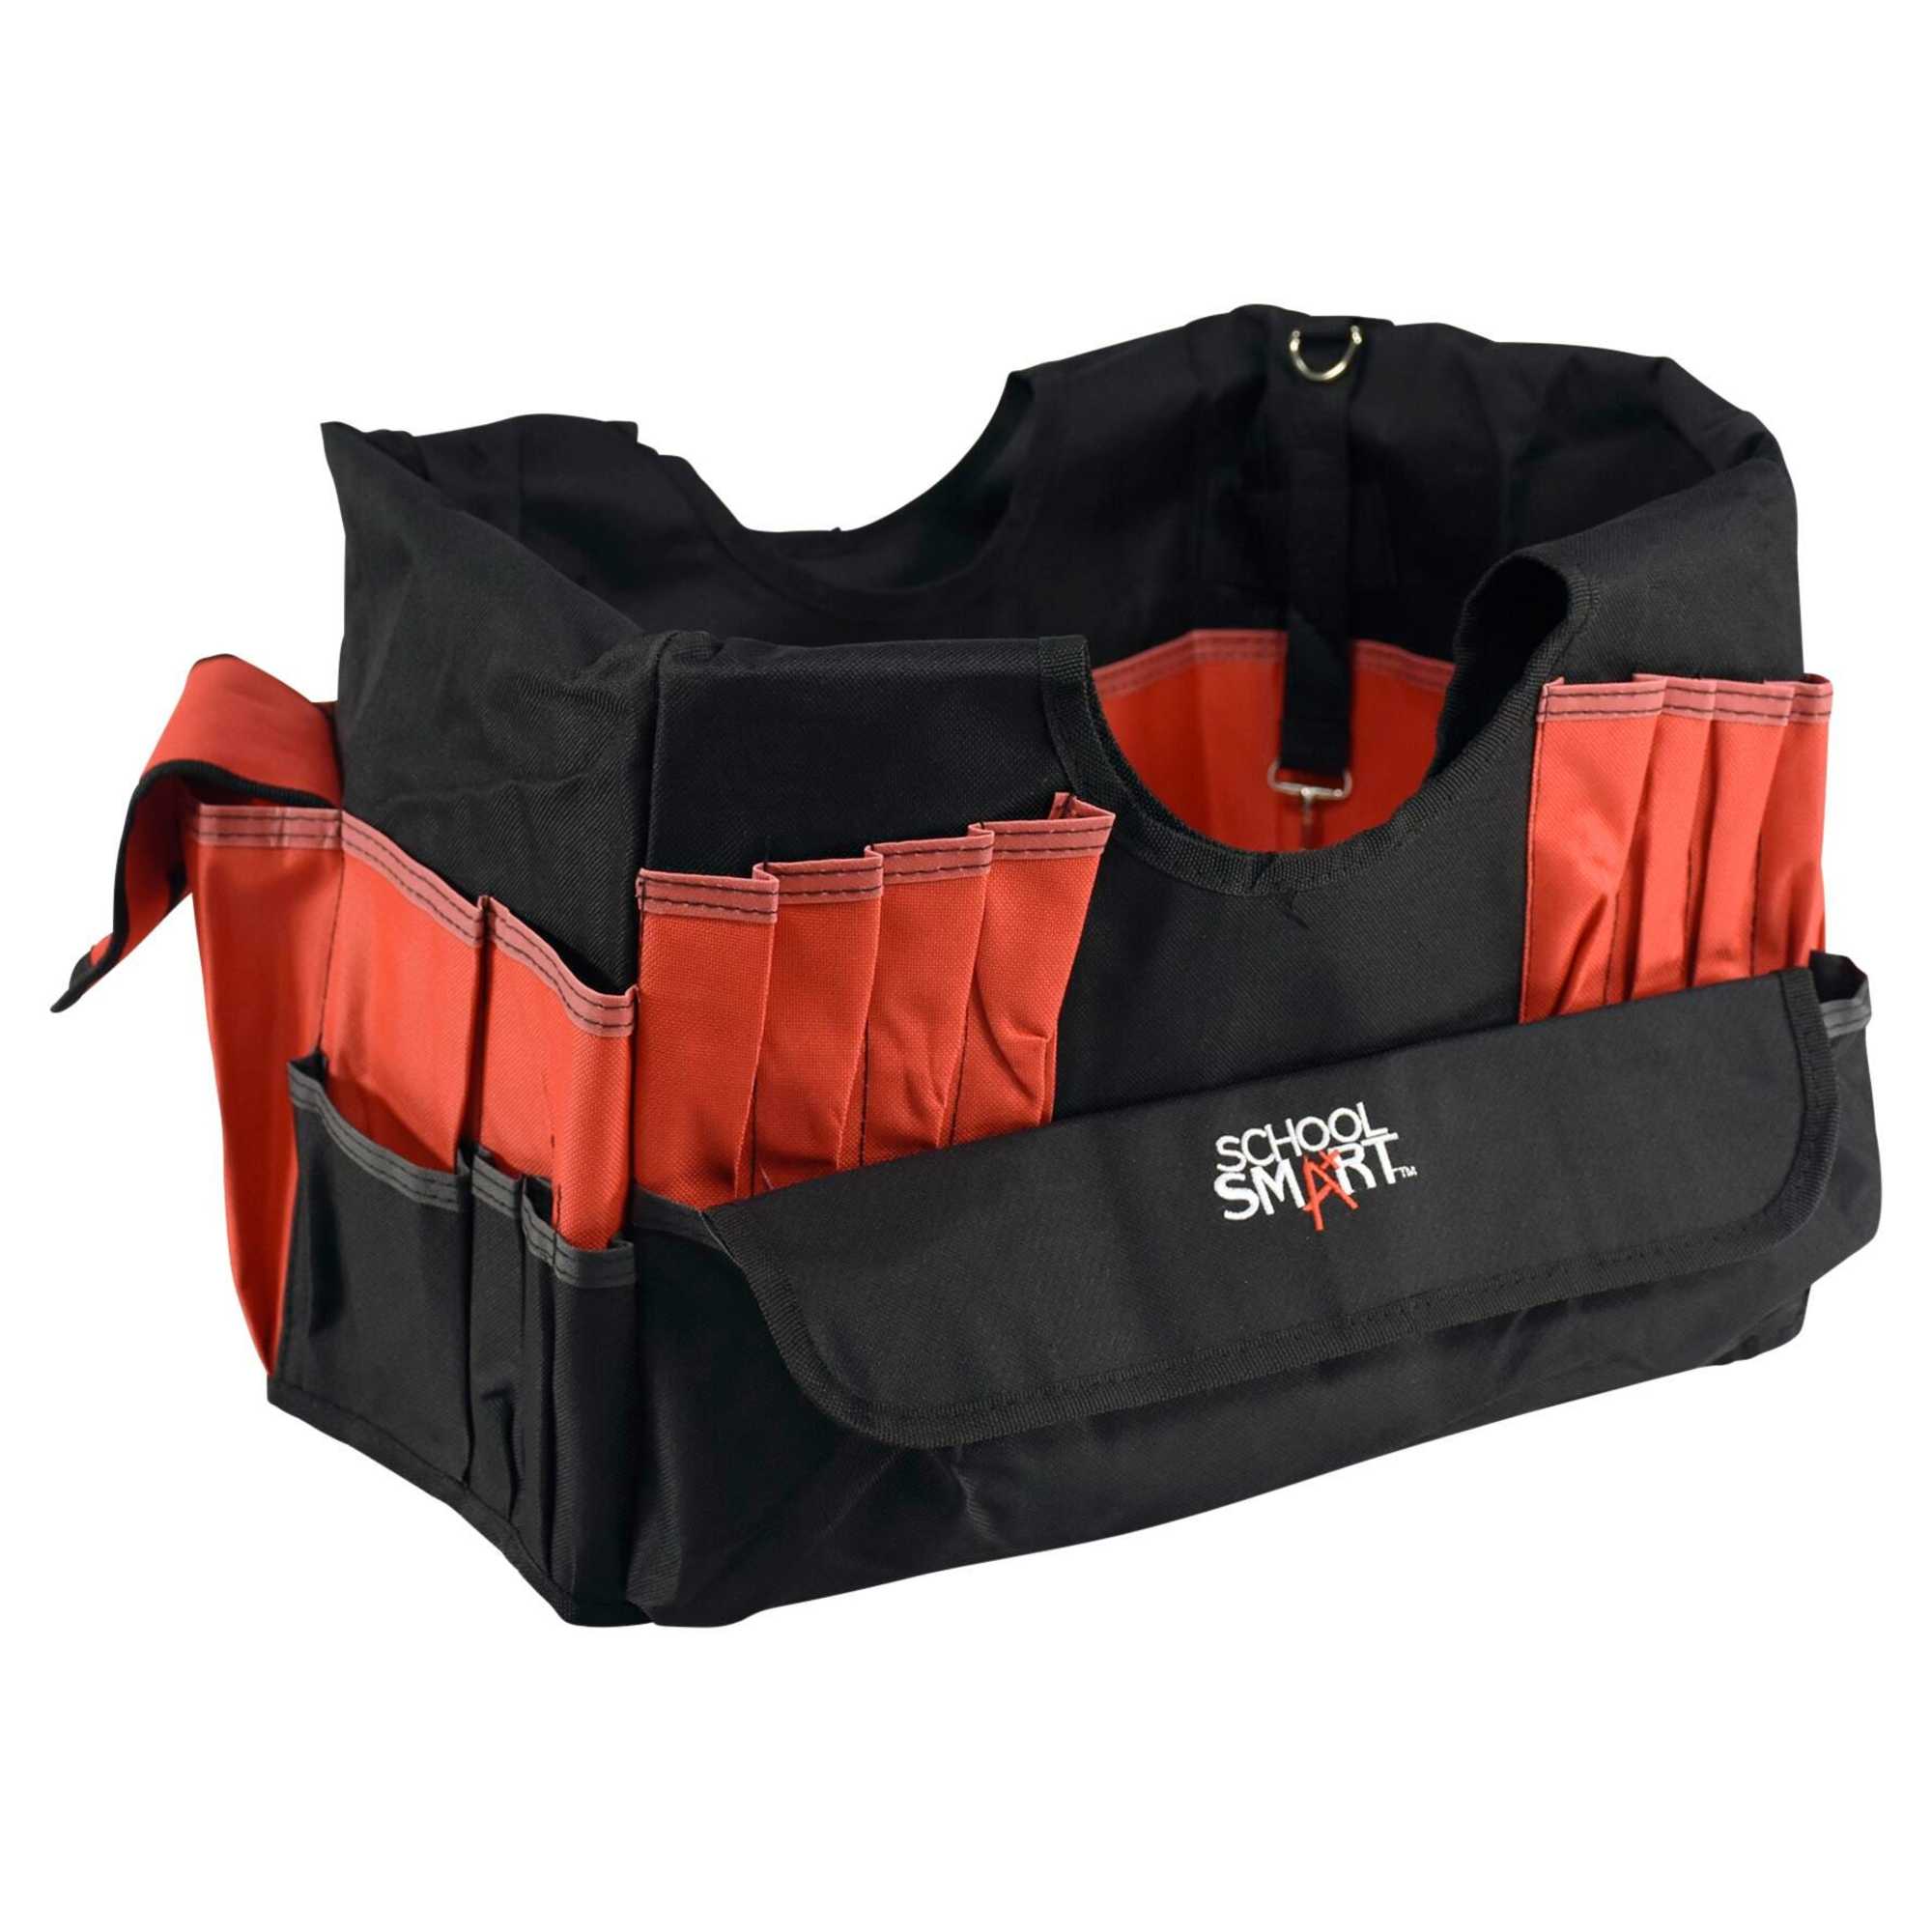 School Smart Caddy Organizer with 43 Pockets, Medium, 14 x 12 x 12 Inches, Black/Red - image 1 of 7